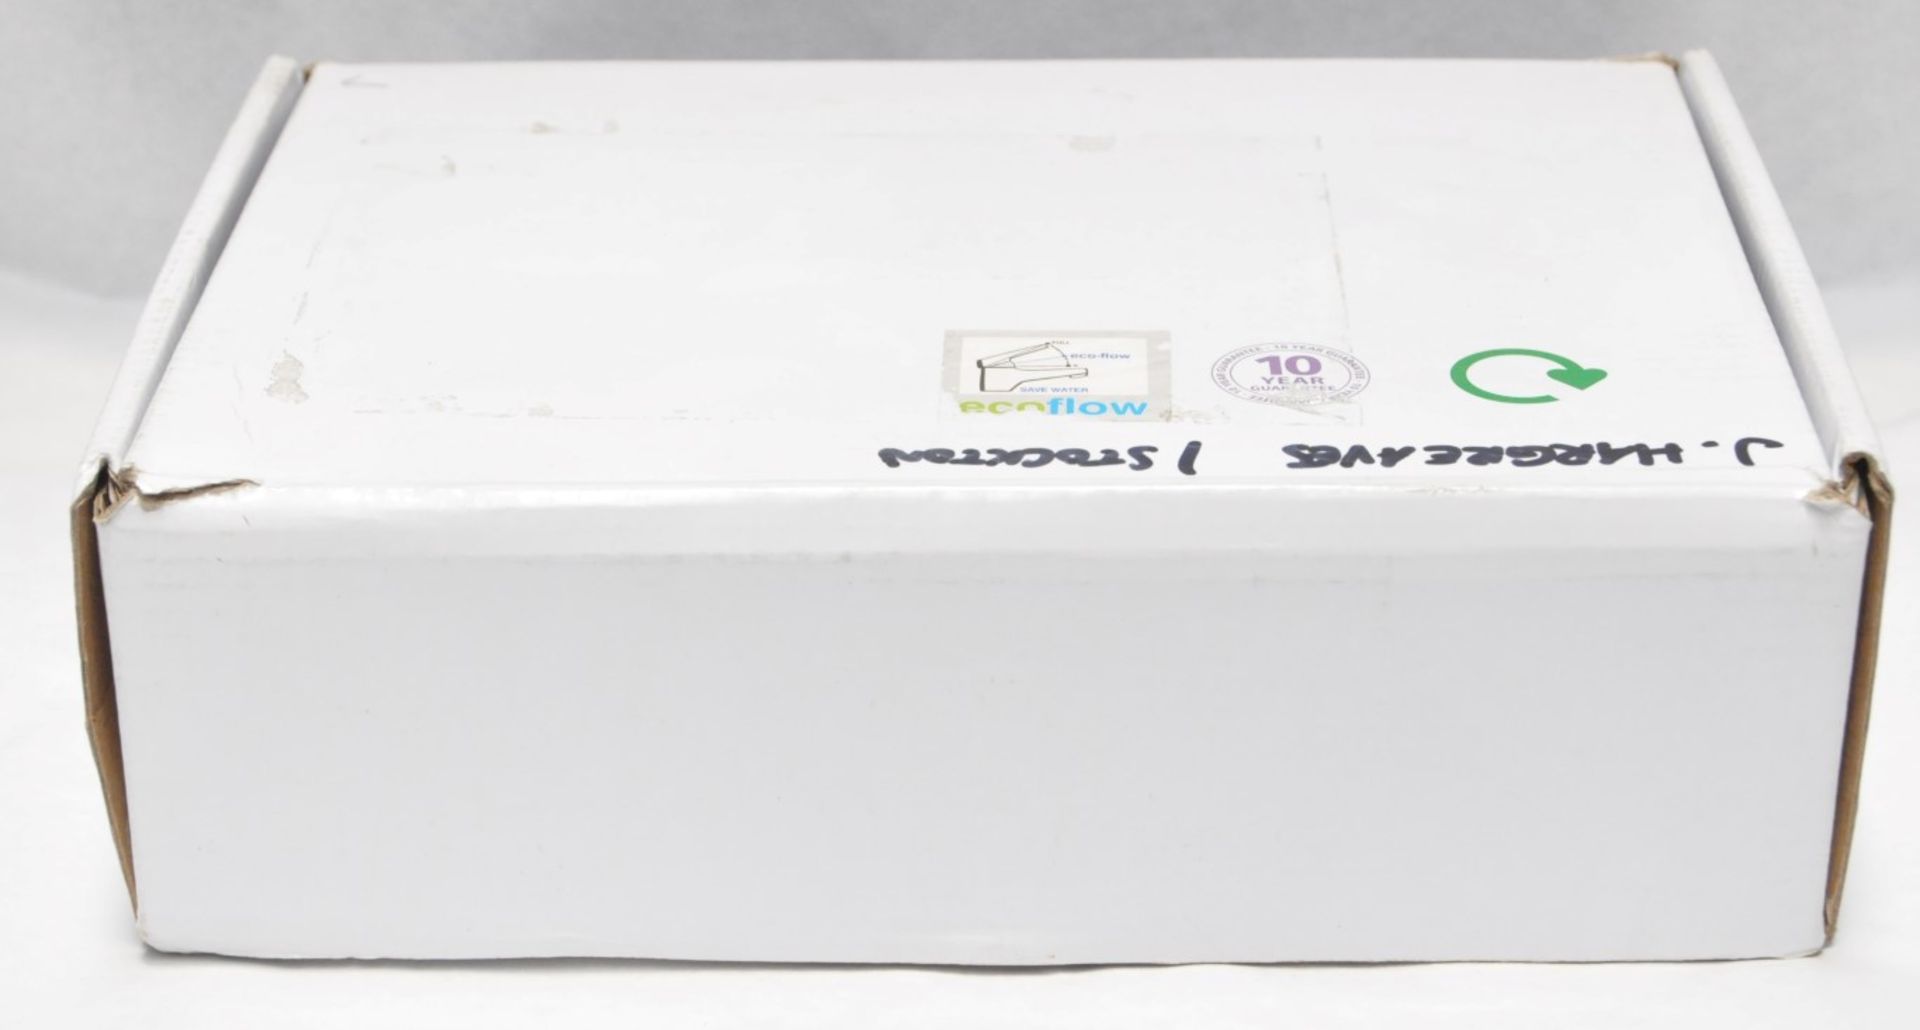 1 x Basin Mono Tap – Used Commercial Samples – Boxed in Good Condition – Comes with Sprung Waste - - Image 2 of 6